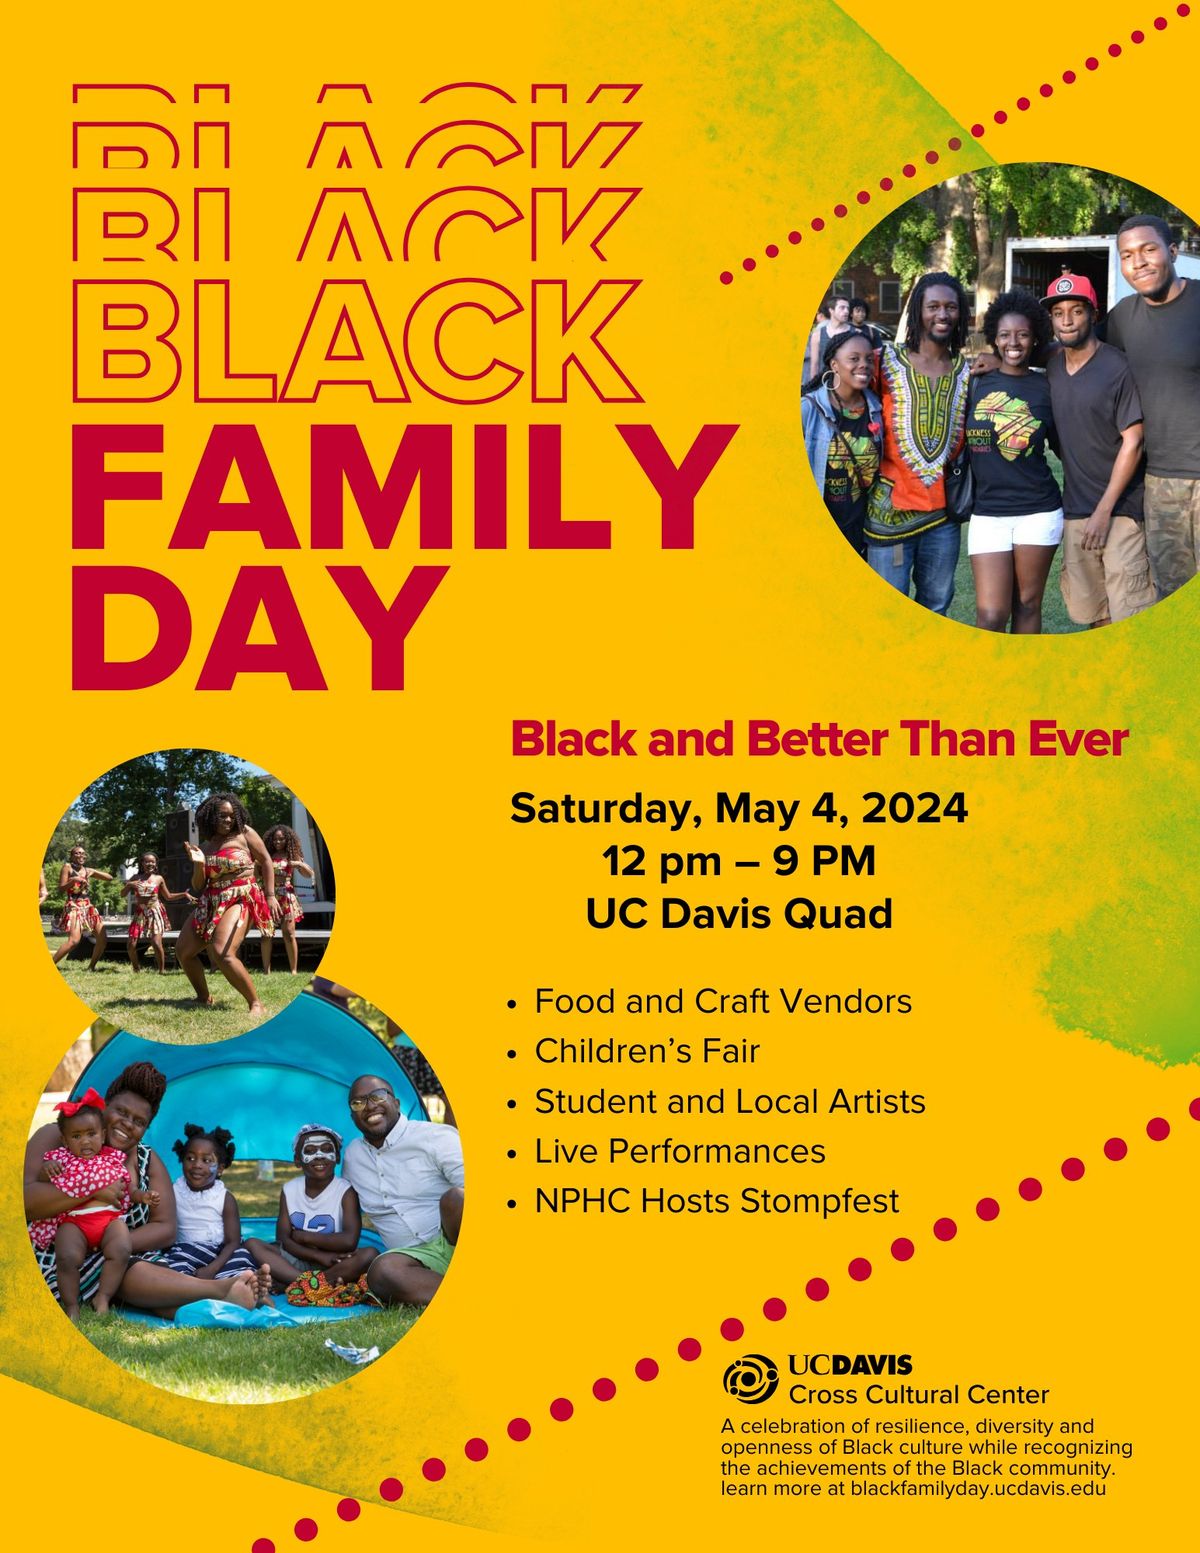 Come to UC Davis for Black Family Day!